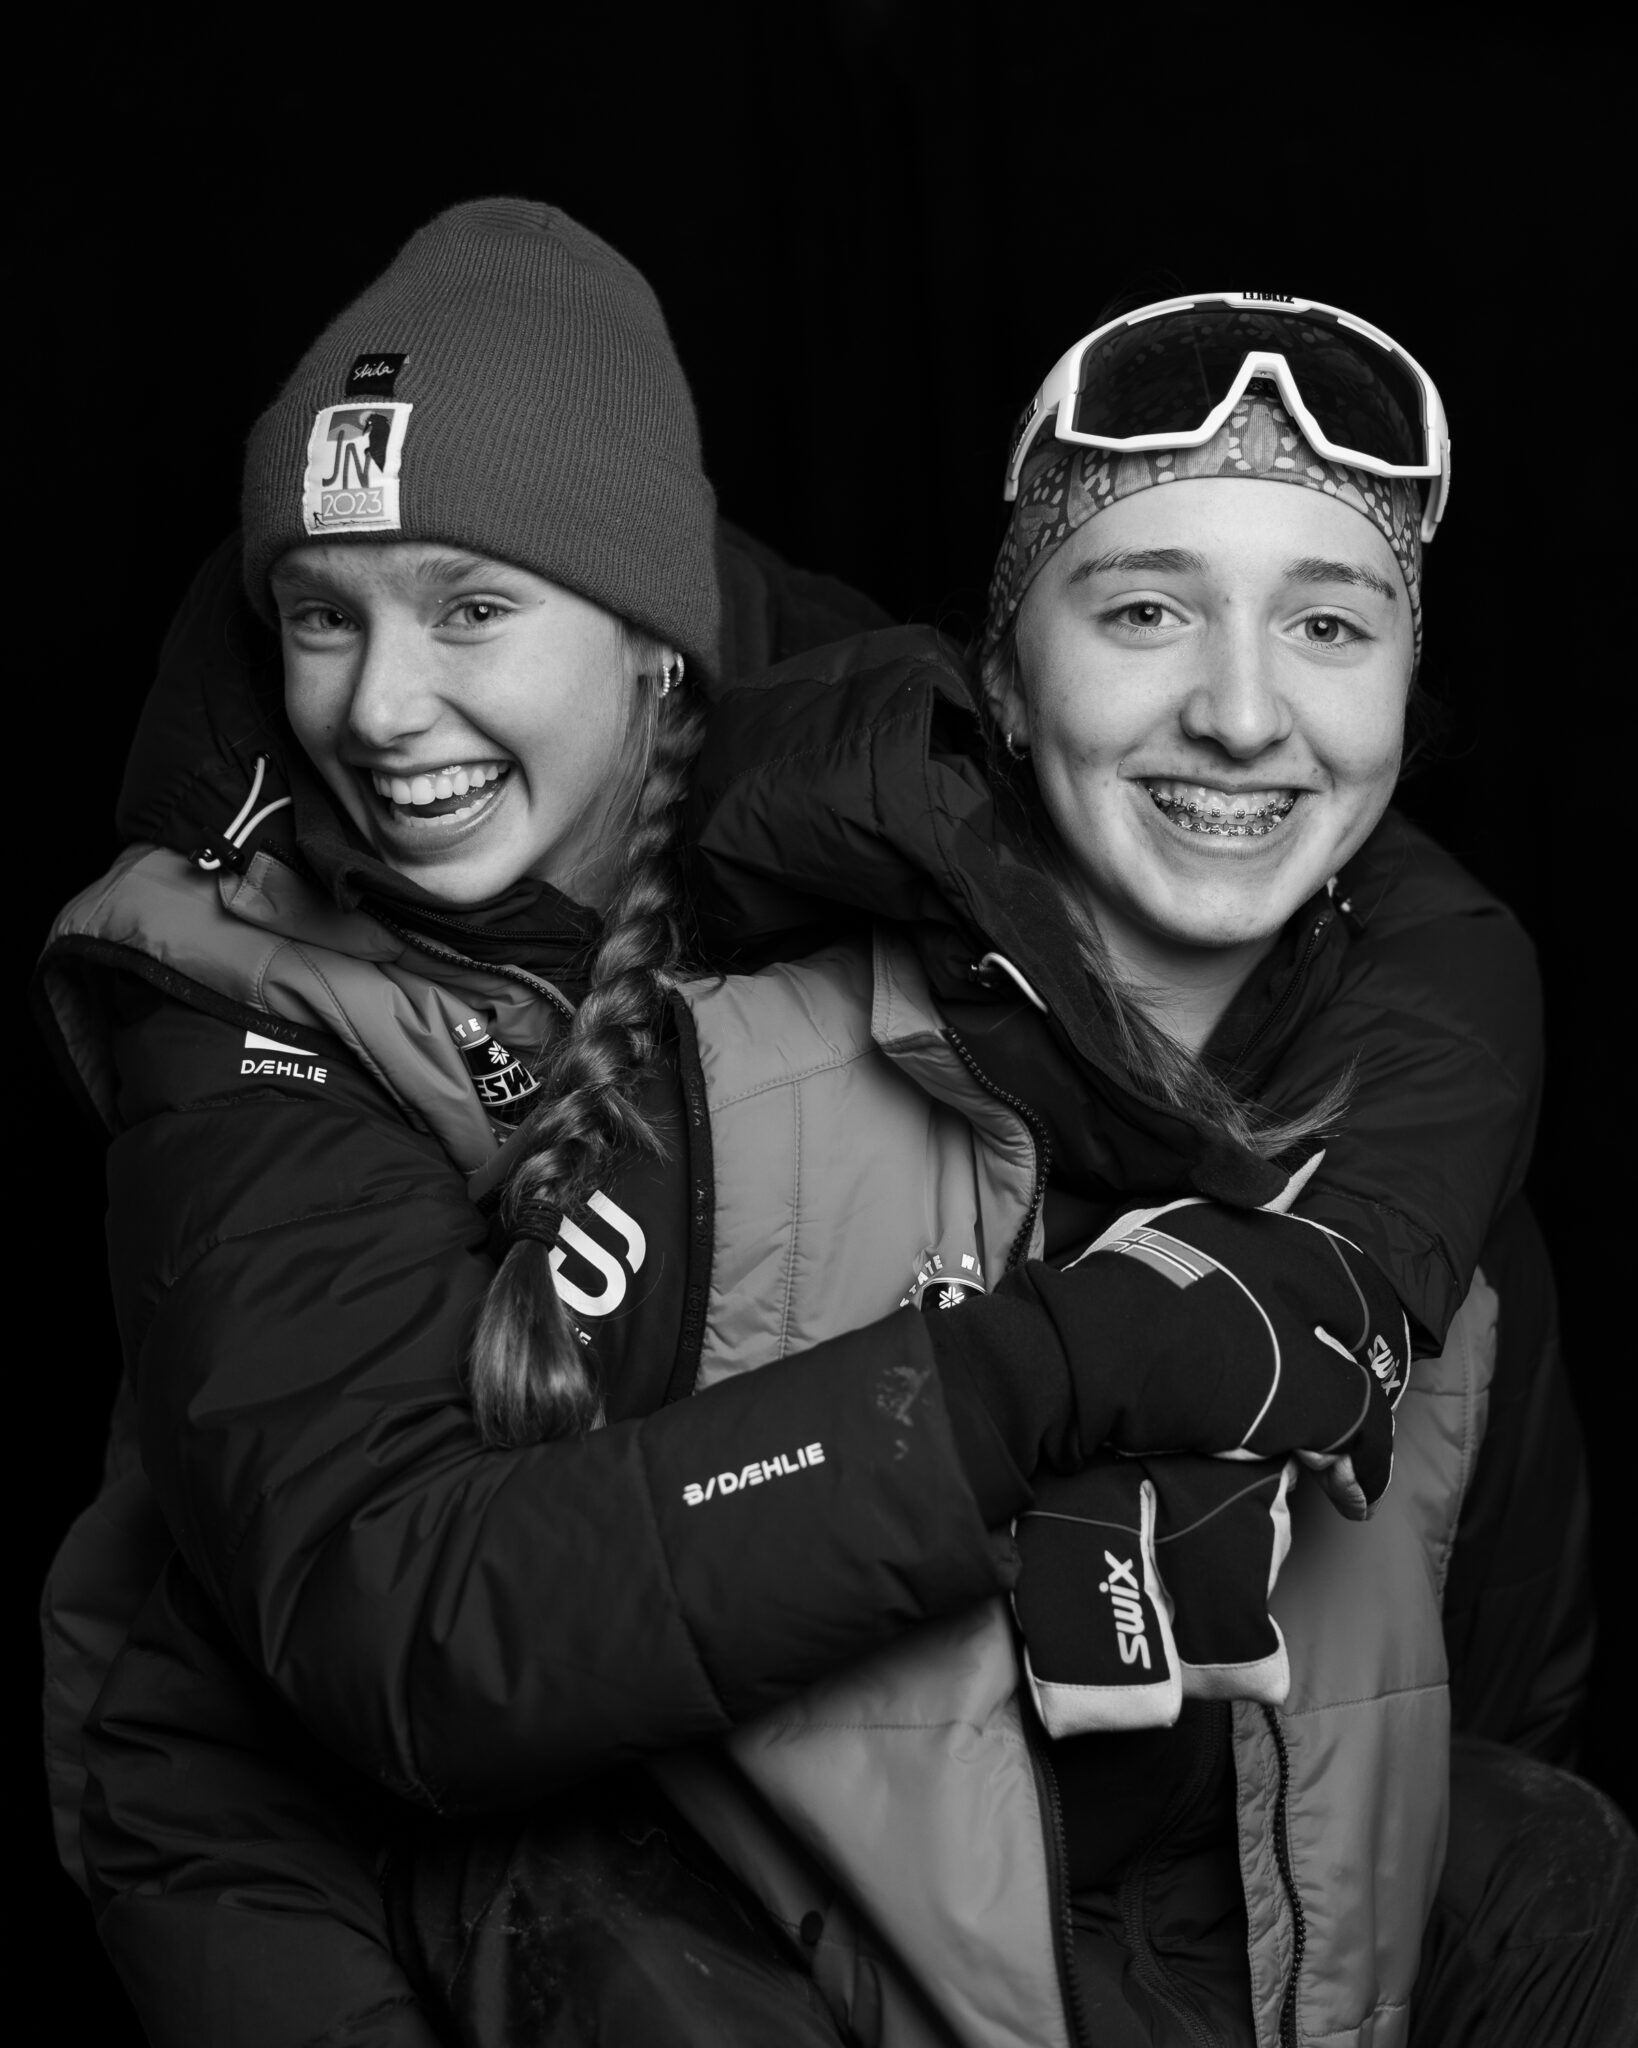 two people in winter gear hug each other and smile